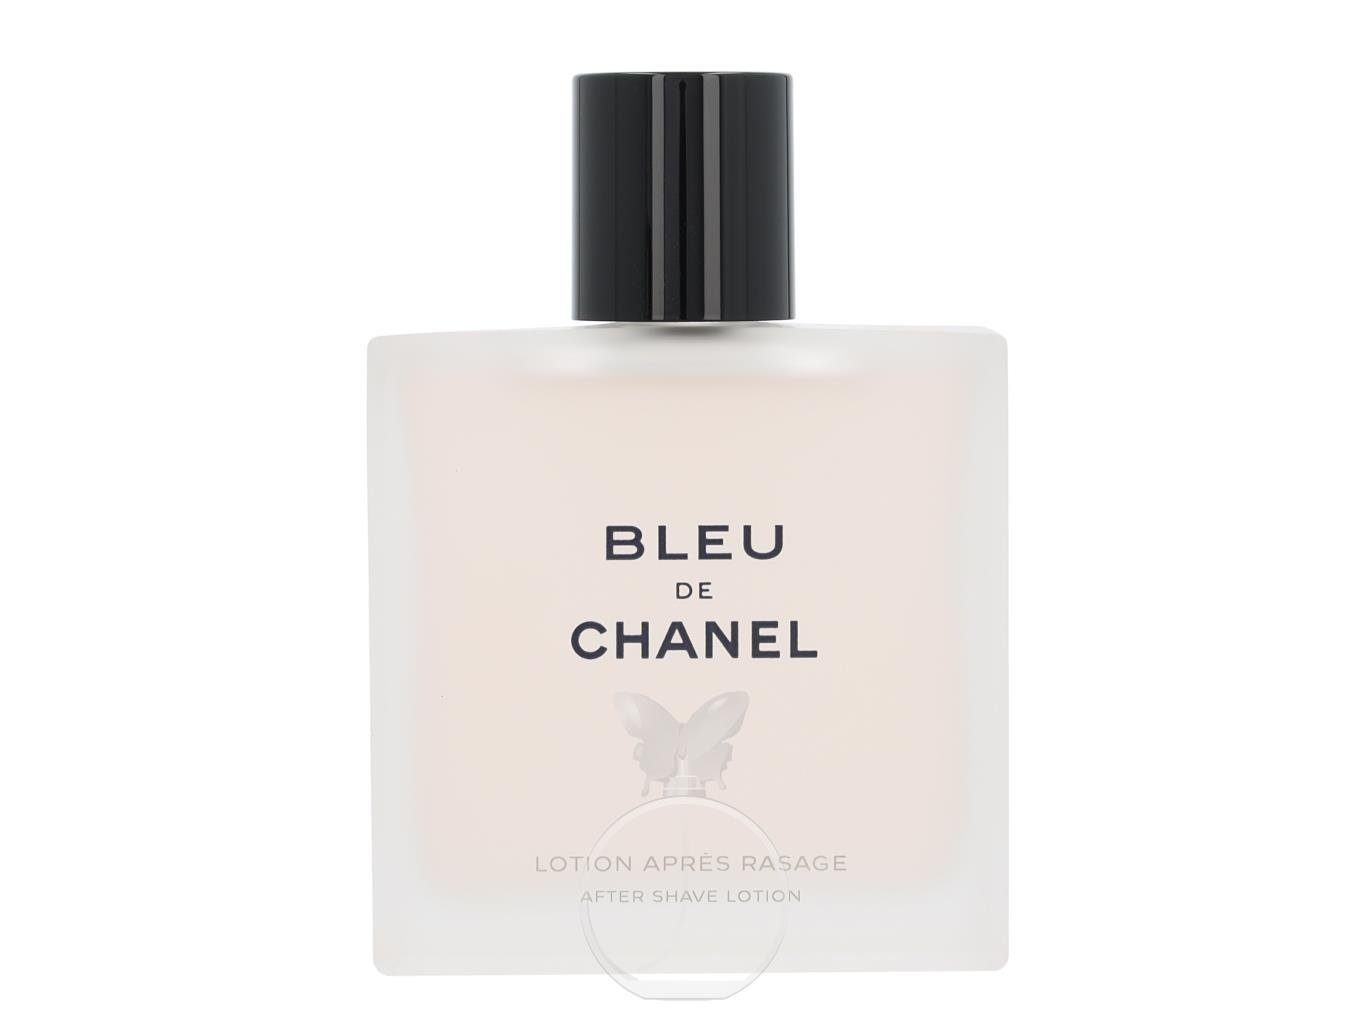 CHANEL After Shave Lotion Chanel Bleu de Chanel After Shave Lotion 100 ml Packung